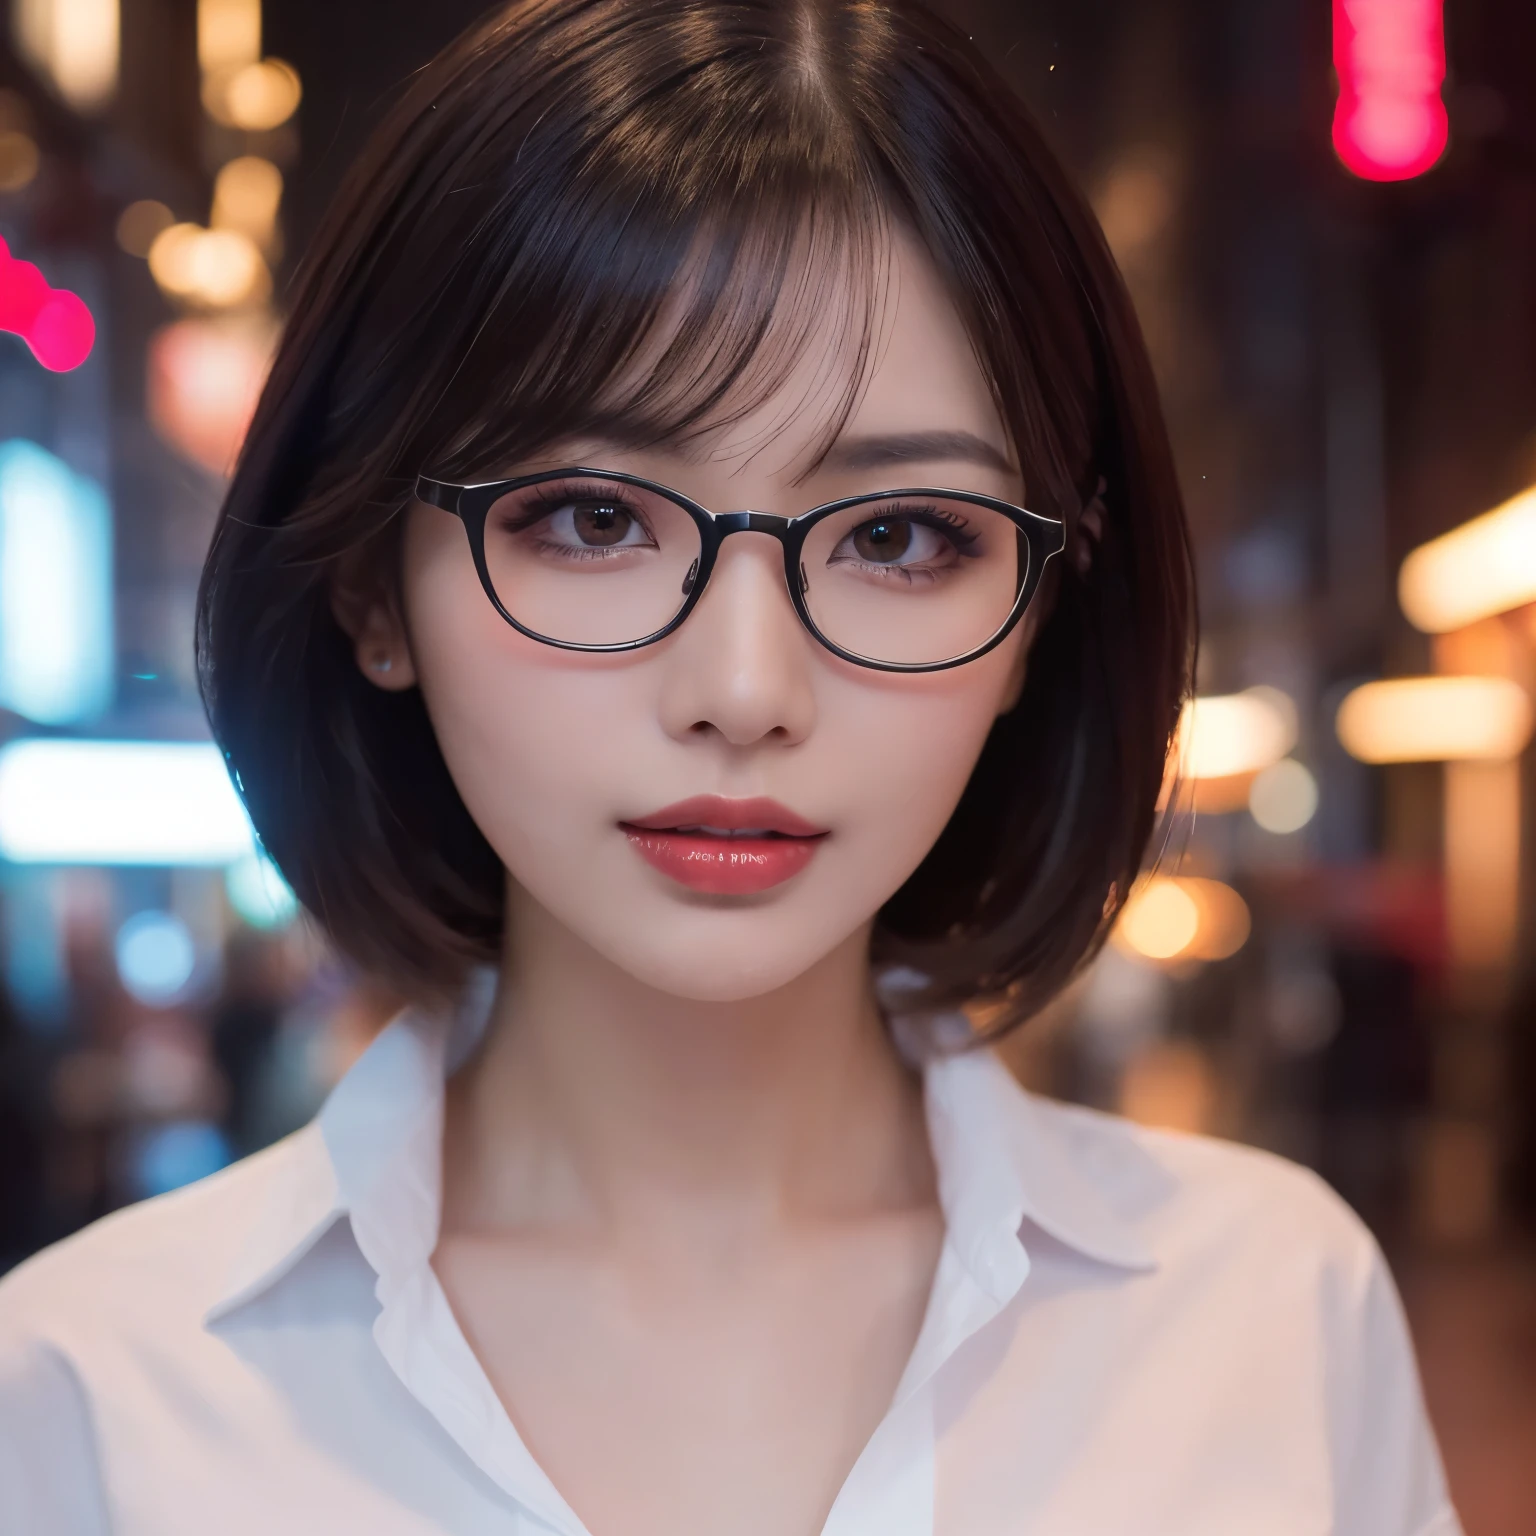 (highest quality、table top、8k、best image quality、Award-winning work)、one beautiful woman、25 years old、perfect beautiful composition、(very short straight hair:1.1)、(Classy glasses:1.1)、cleavage、Big breasts that are about to burst、emphasize body line、(Perfect and precise white polyester shirt:1.3)、look at me、perfect makeup、Bewitching、Overflowing sex appeal、glossy and bright lips、accurate anatomy、(close up of face:1.7)、look at me、(the moodiest lighting:1.1)、(Blurred red light district background with a moody and romantic atmosphere:1.1)、perfect makeup、Ultra high definition beauty face、ultra high definition hair、Ultra high definition moist eyes、(Super high resolution perfect teeth:1.1)、(Super high resolution glossy skin:1.1)、Super high resolution glossy lips